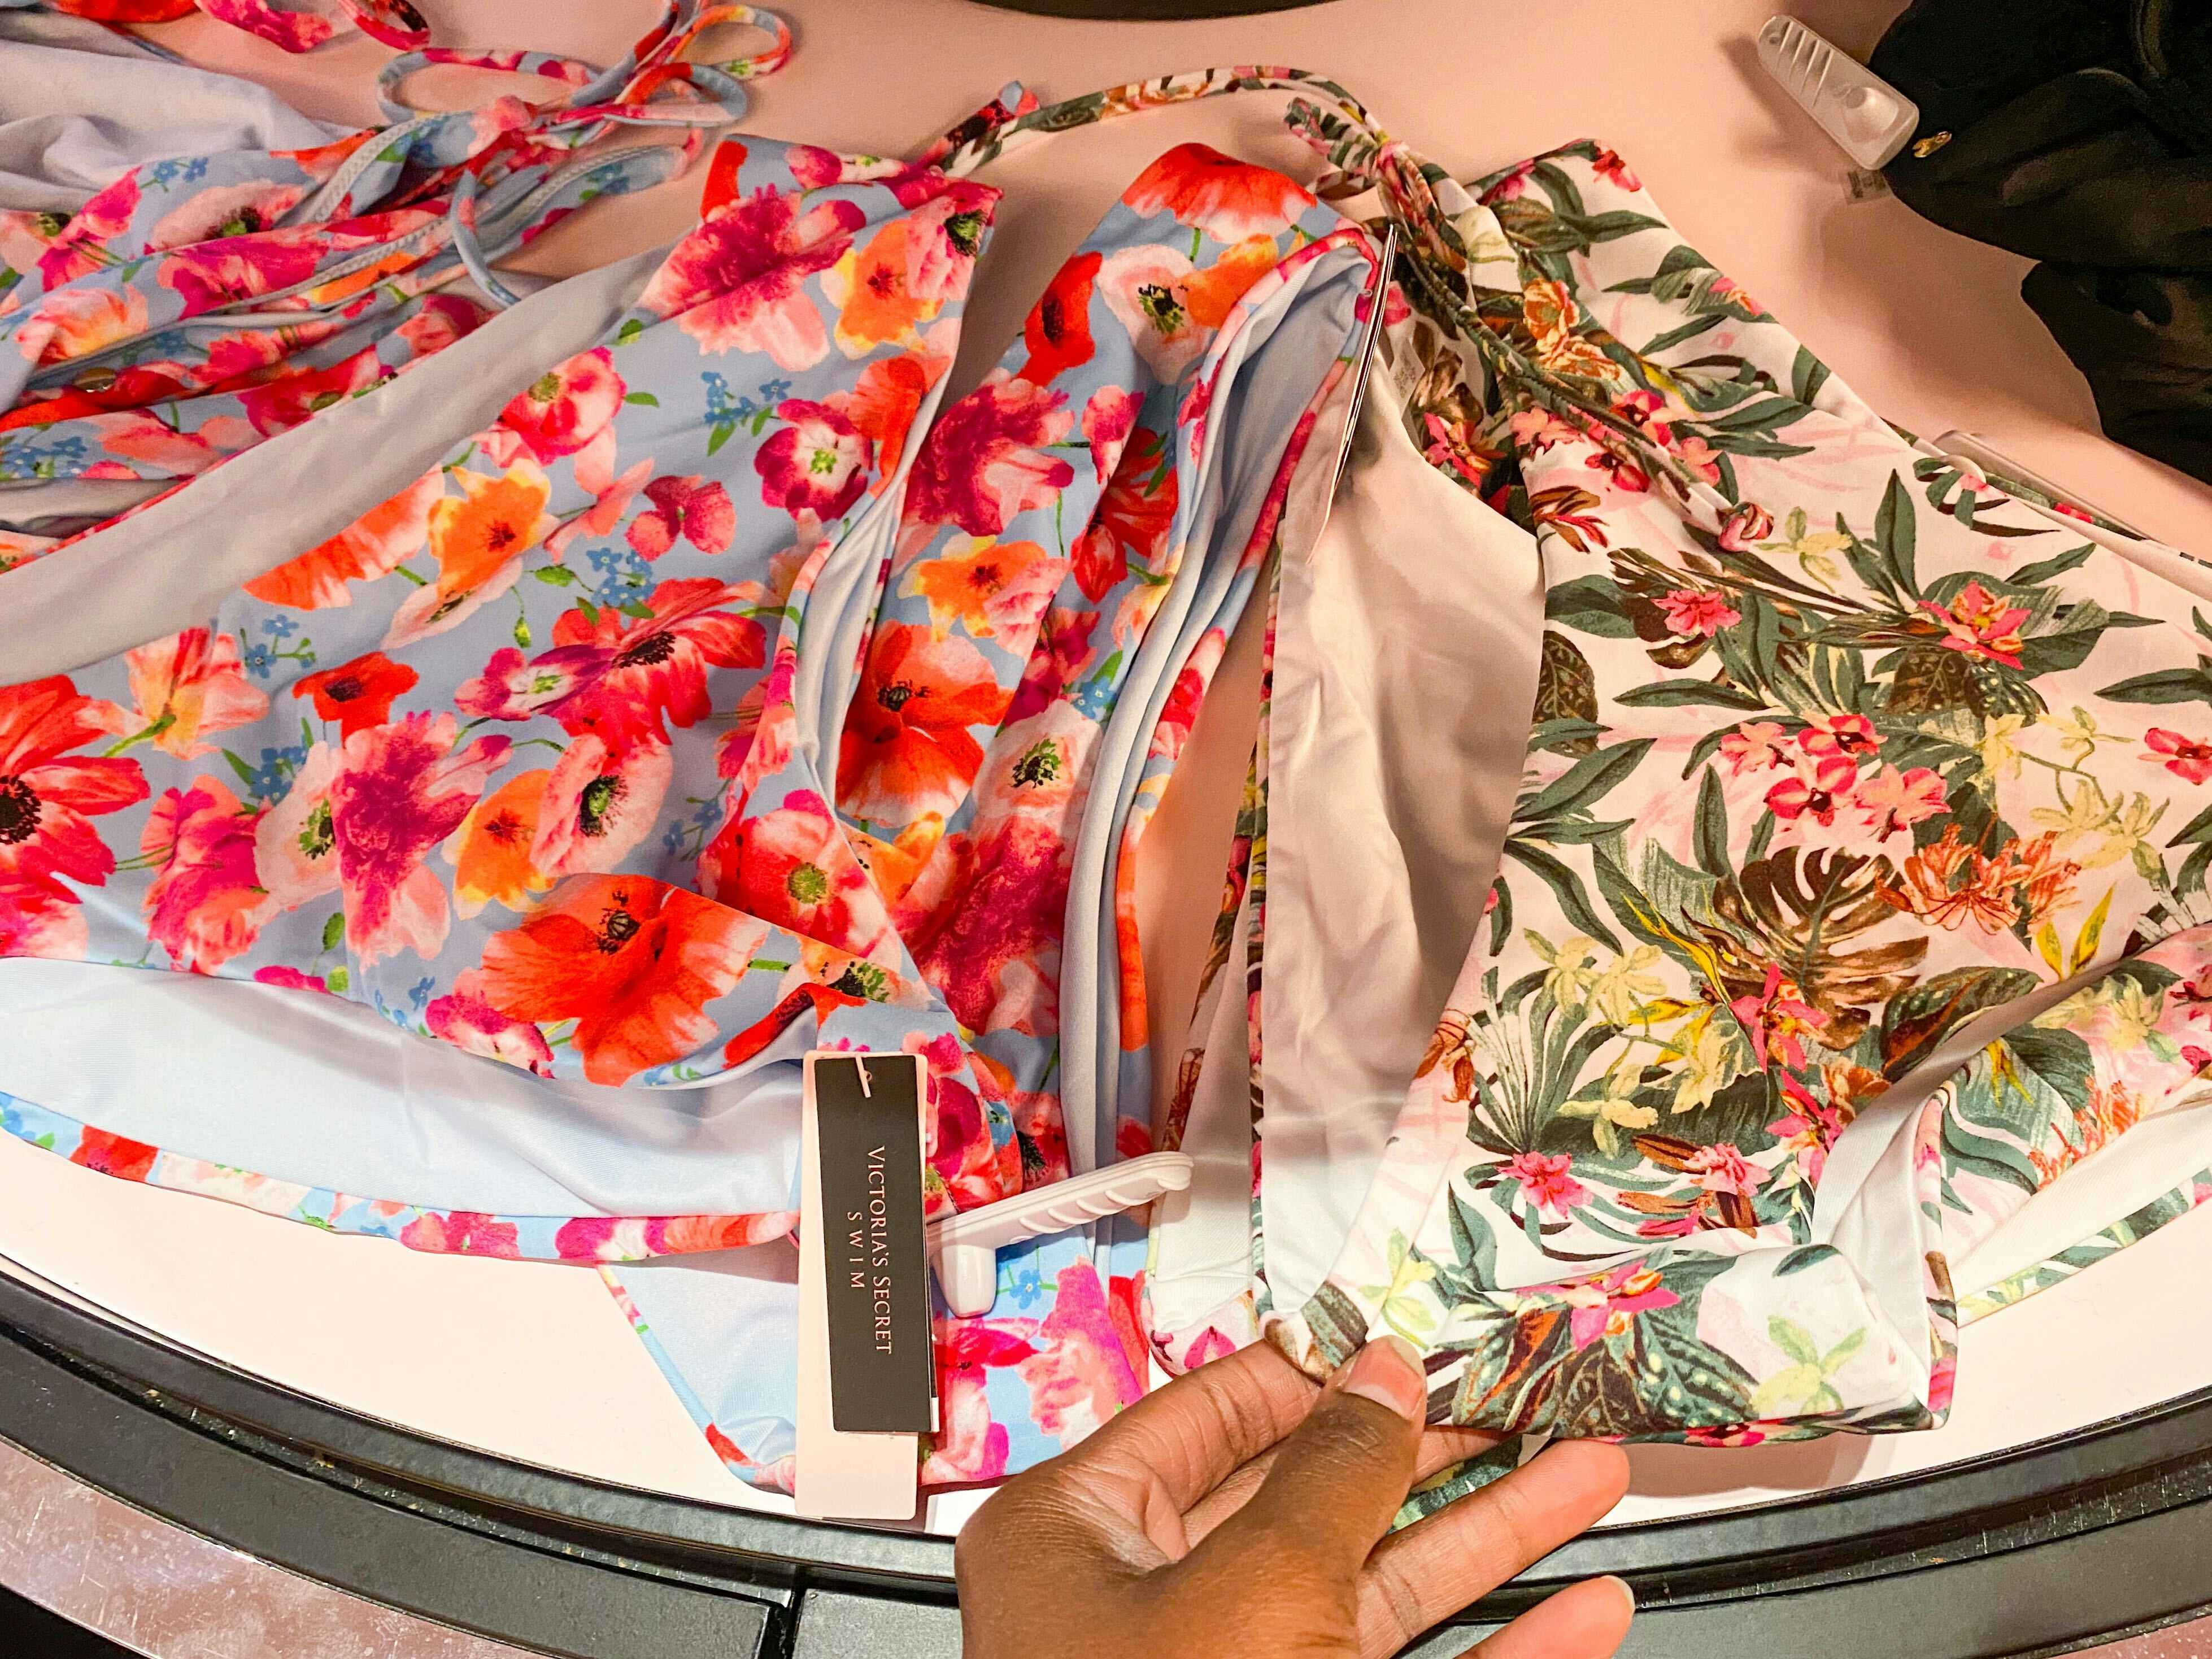 Floral swim bottoms on a display table at Victoria's Secret